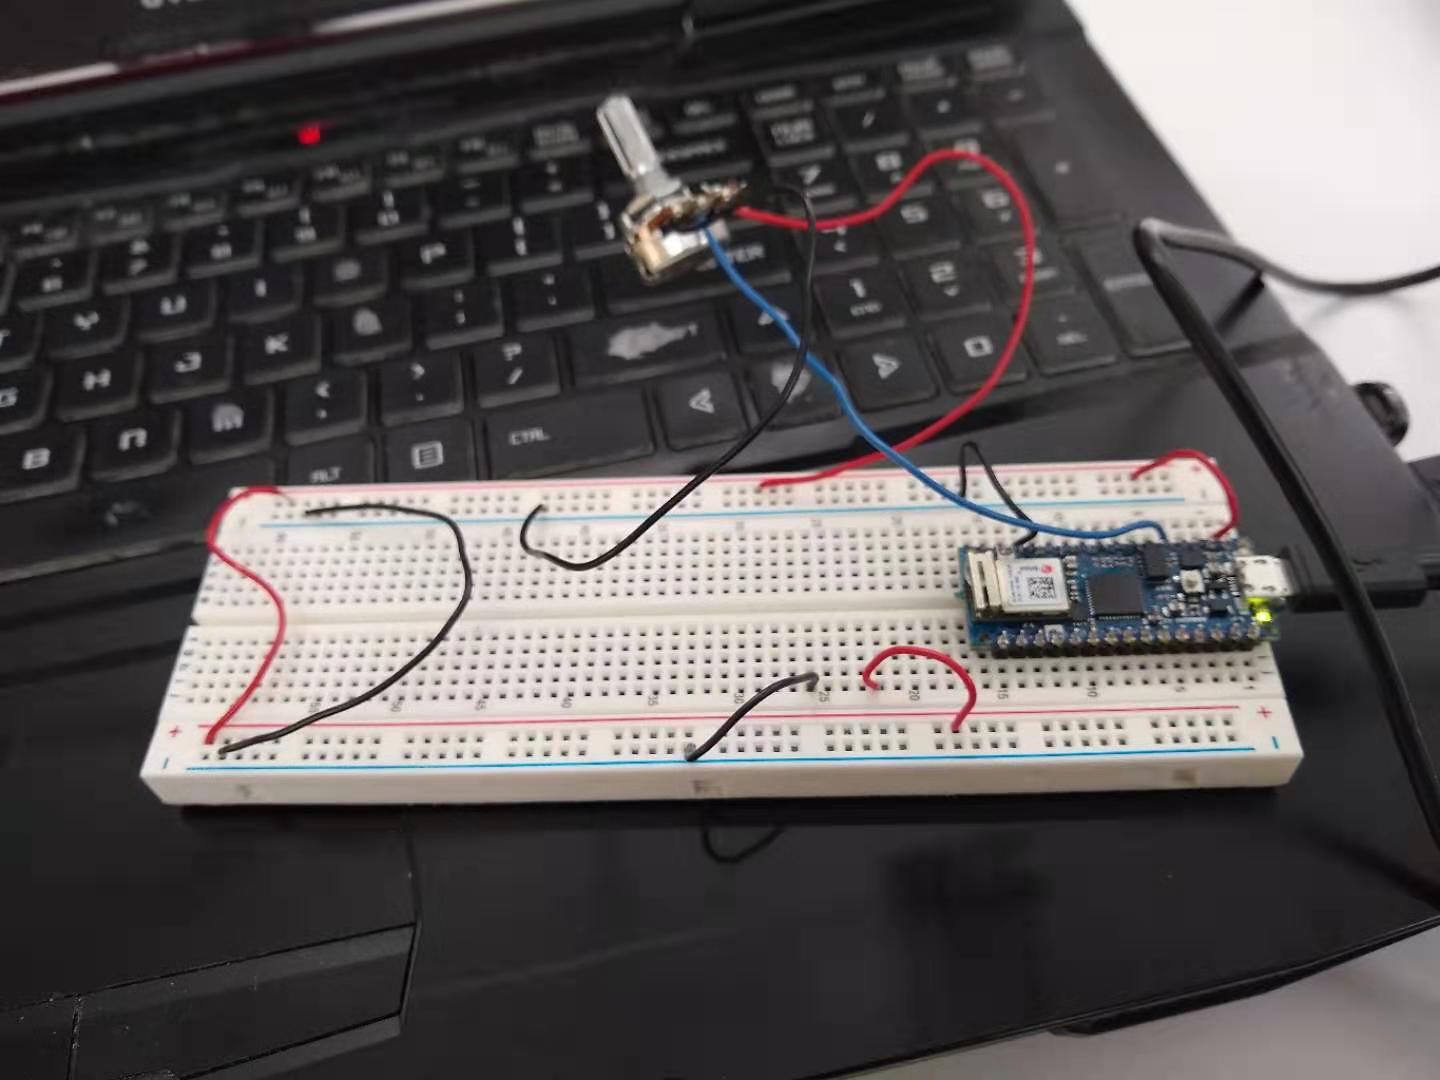 A p5 sketch being controlled by a potentiometer.